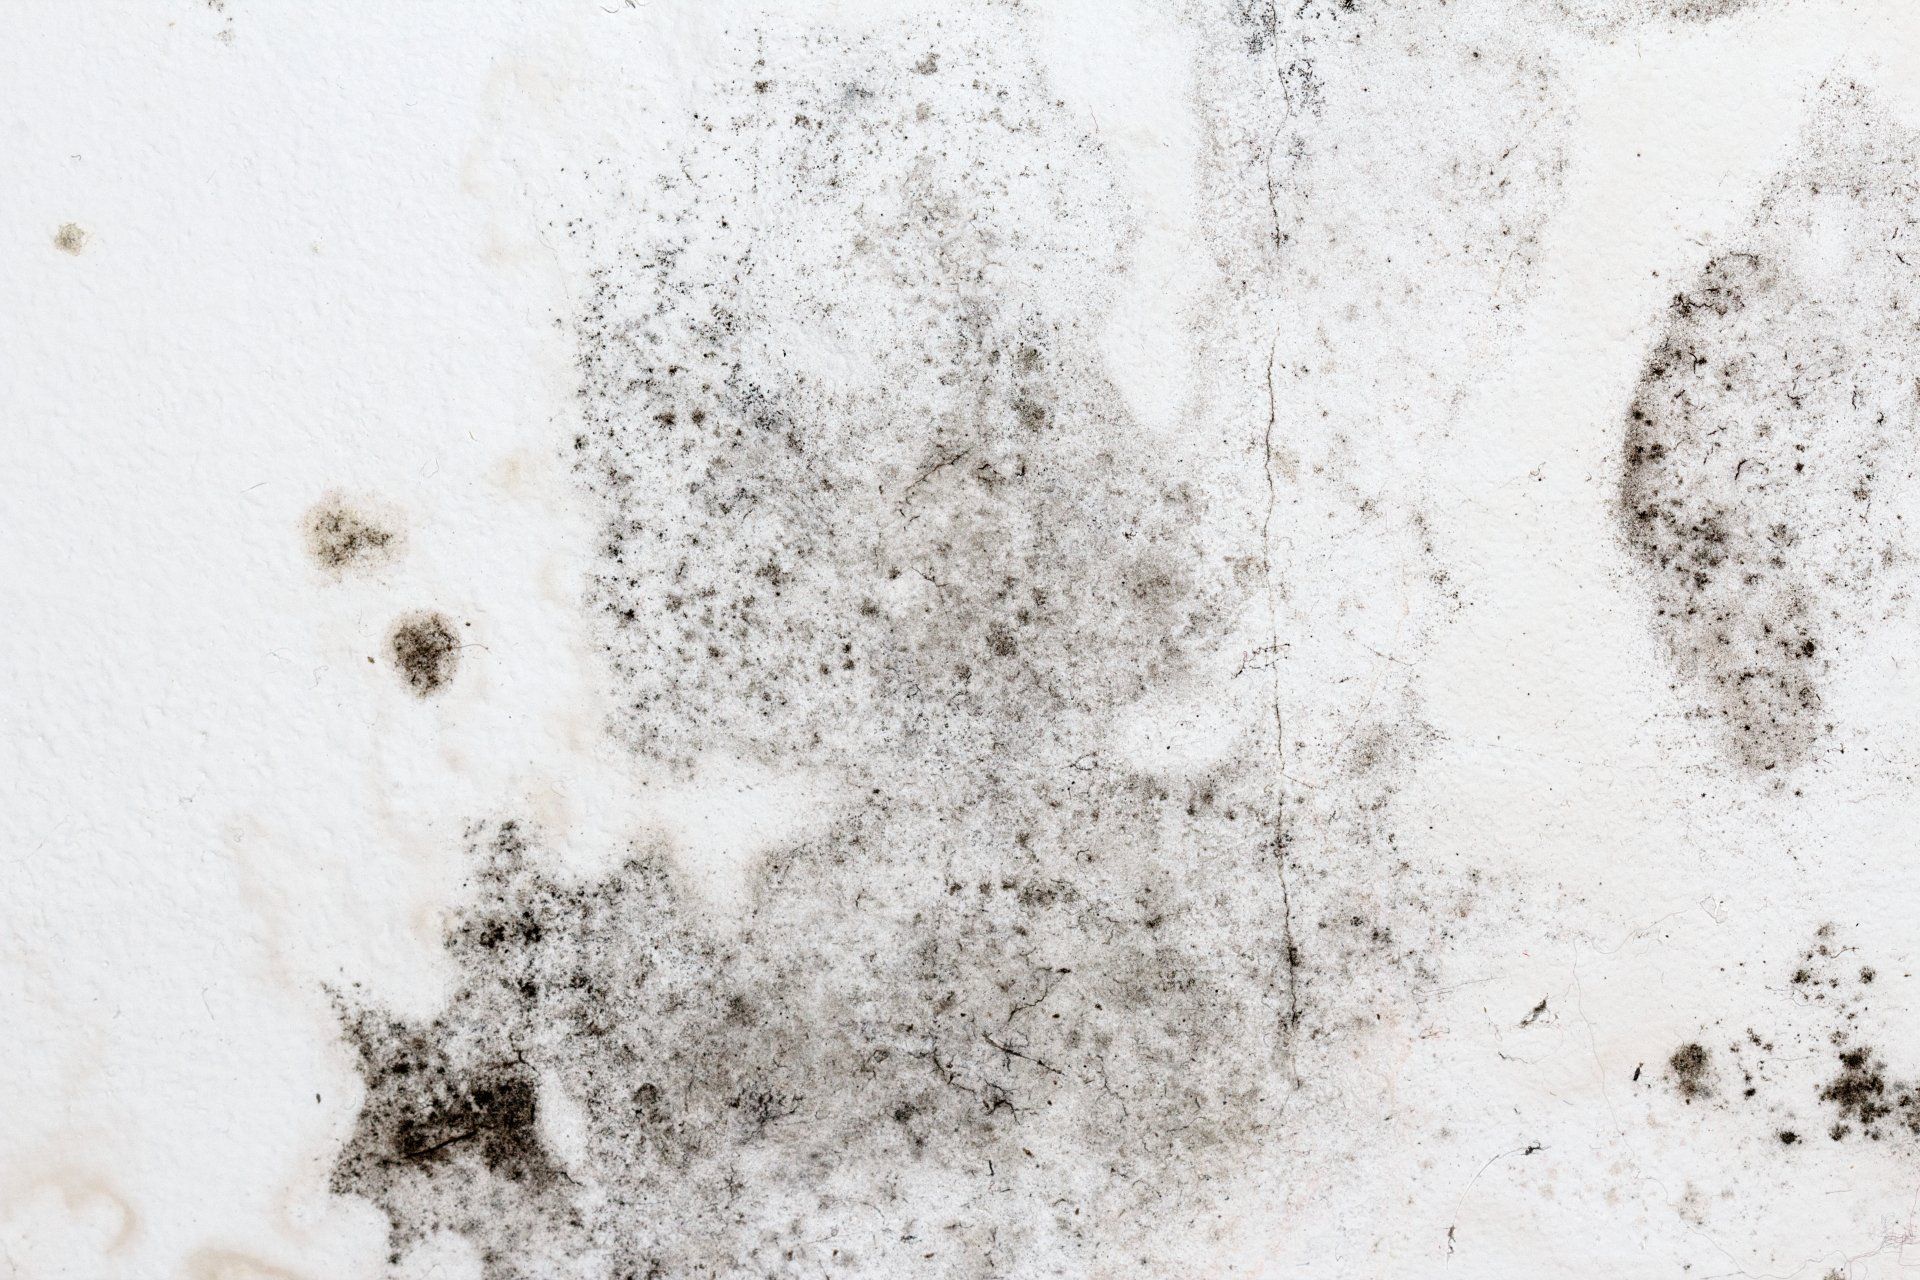 Fungal mold on an interior wall creating health problems for the home owners